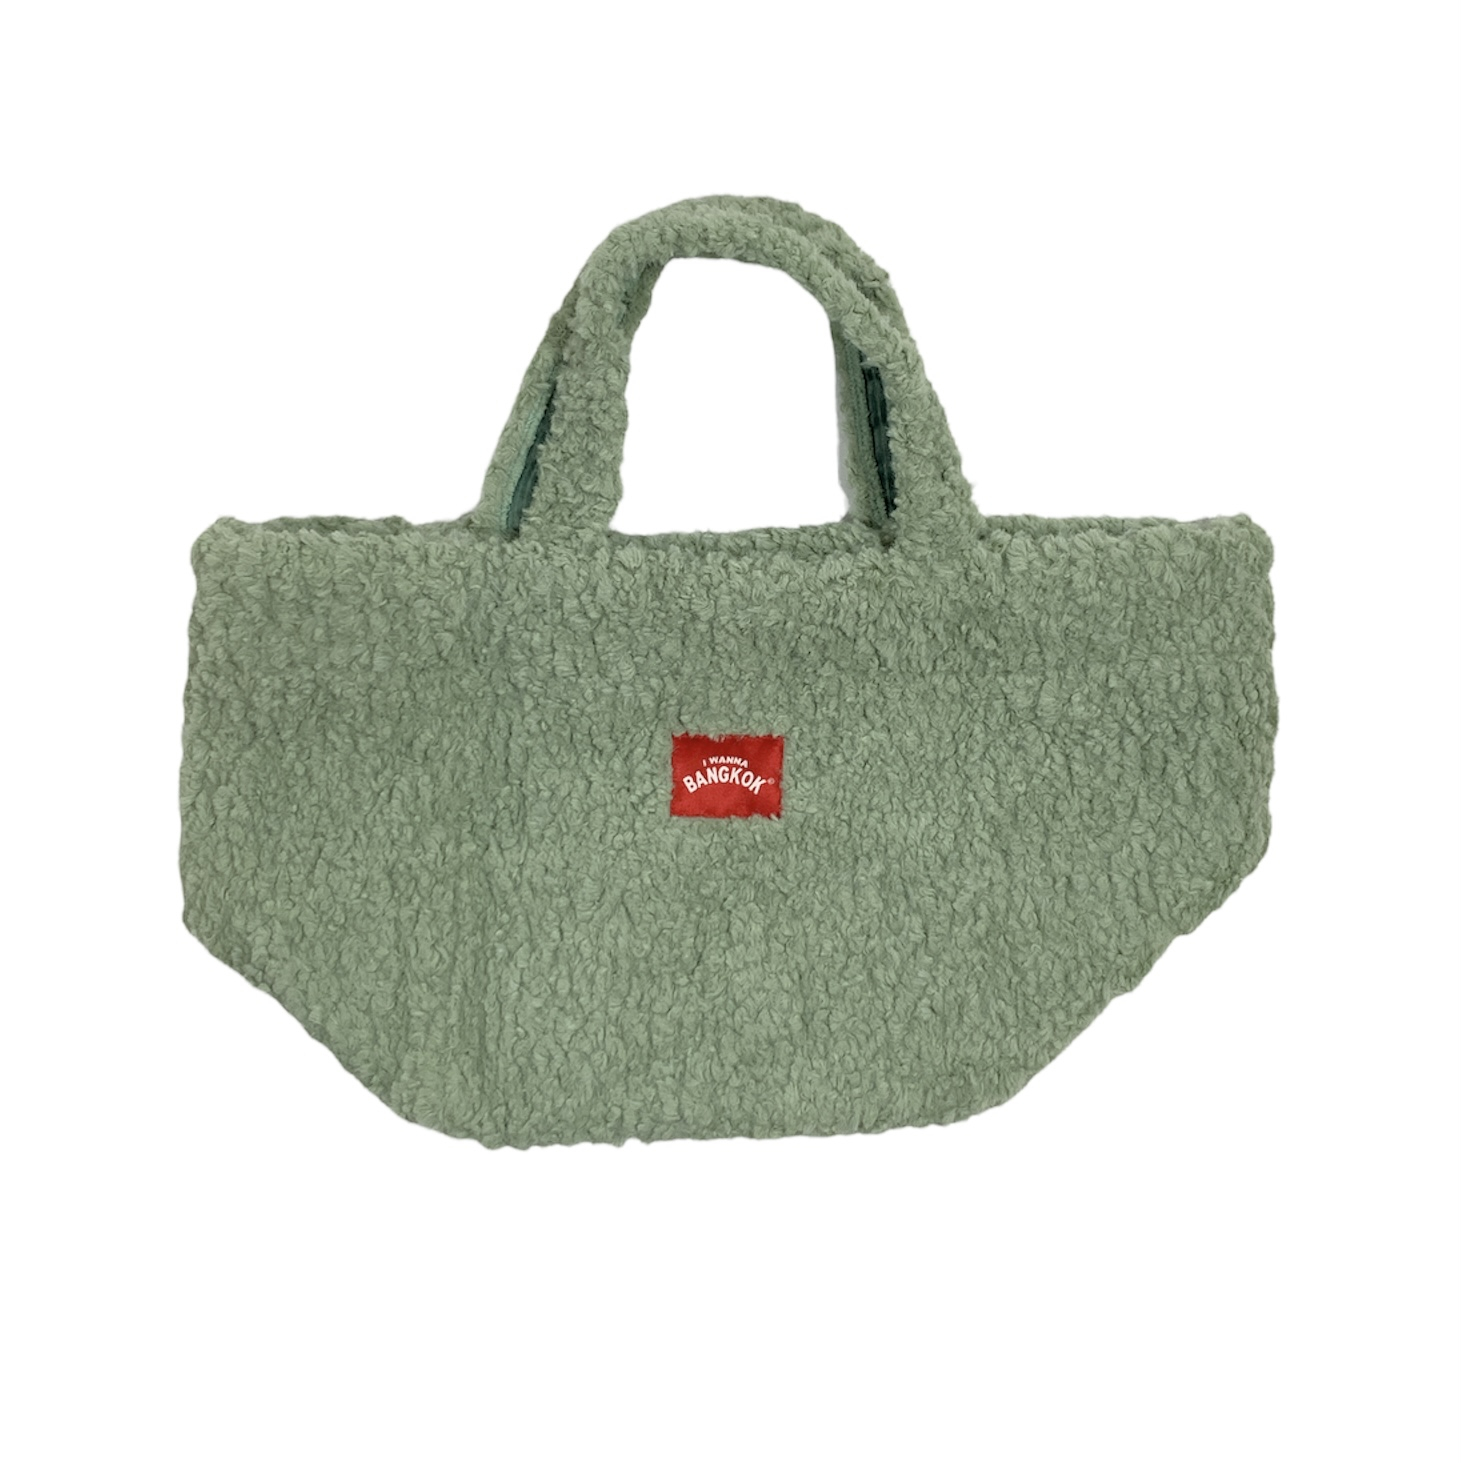 MINT SUMMER TOTE